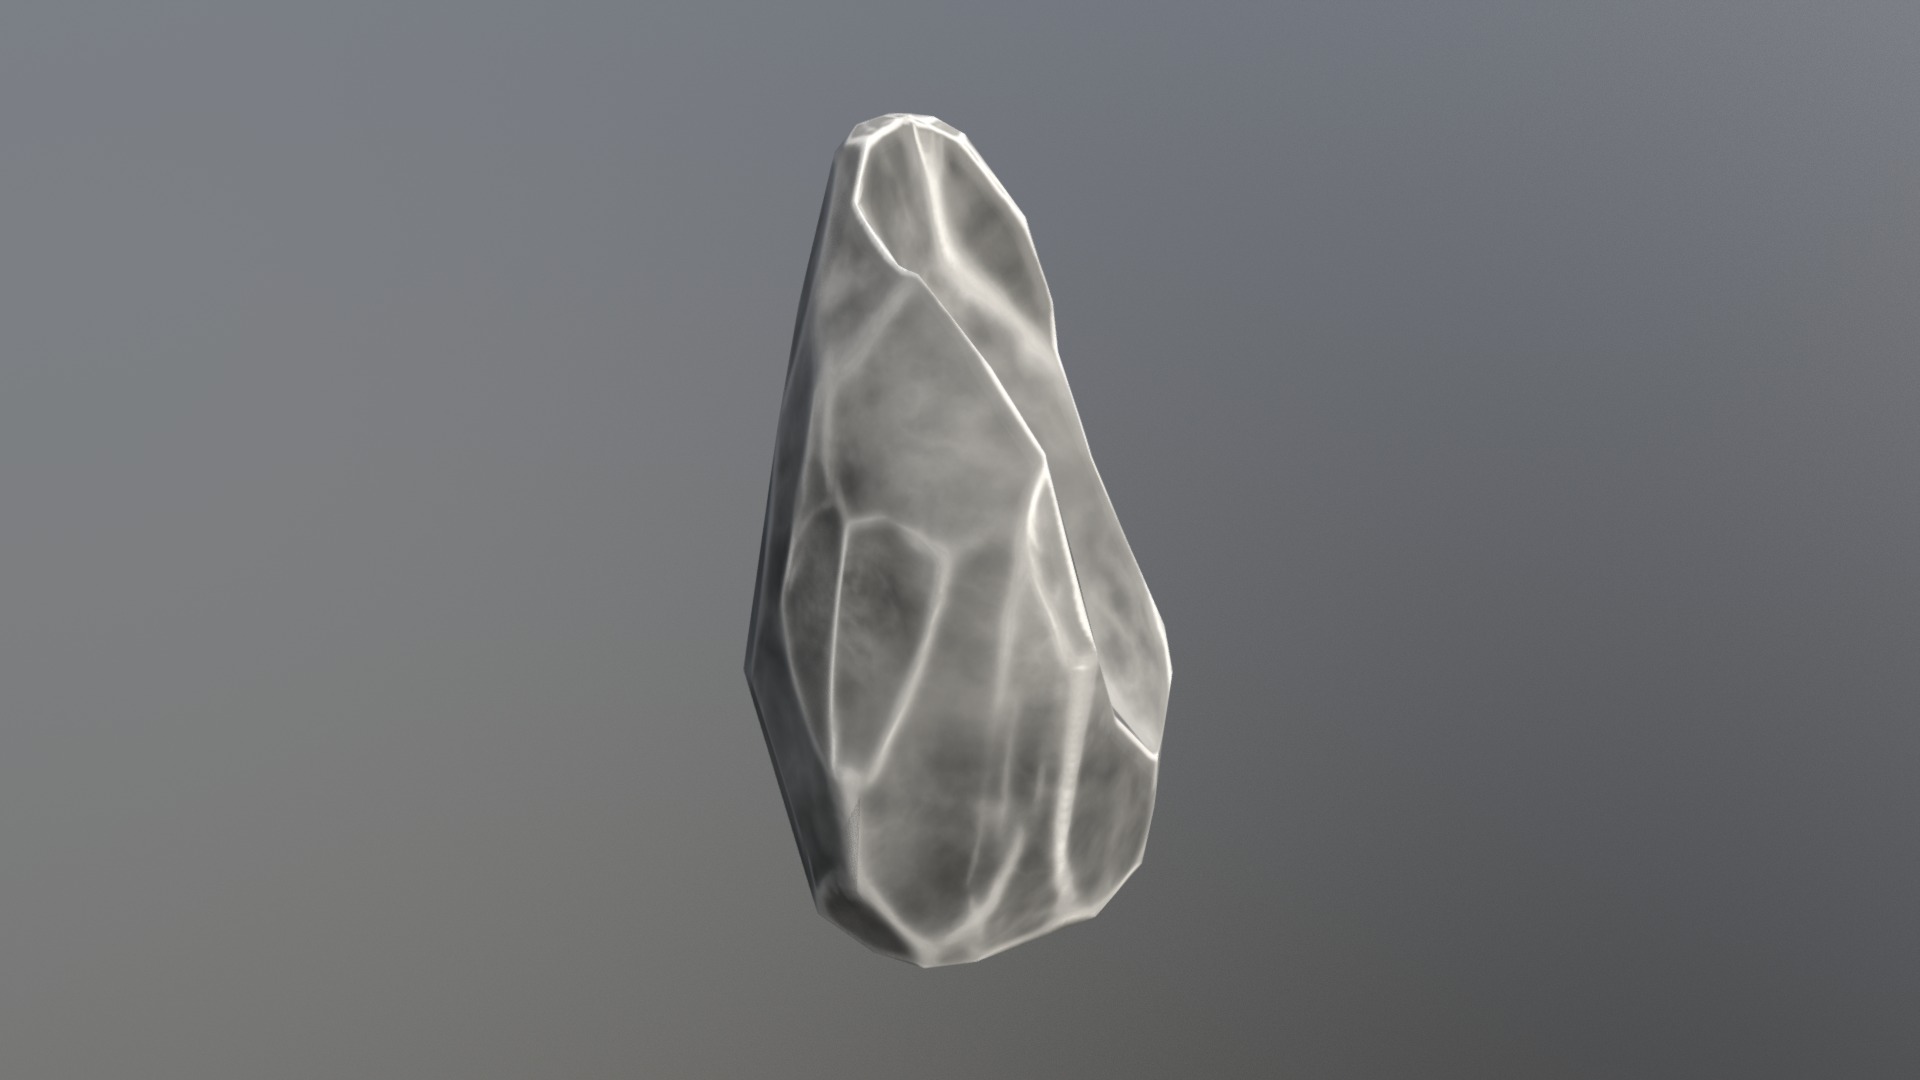 3D model Rock 10 Game Ready Low Poly - This is a 3D model of the Rock 10 Game Ready Low Poly. The 3D model is about a white feather on a grey background.